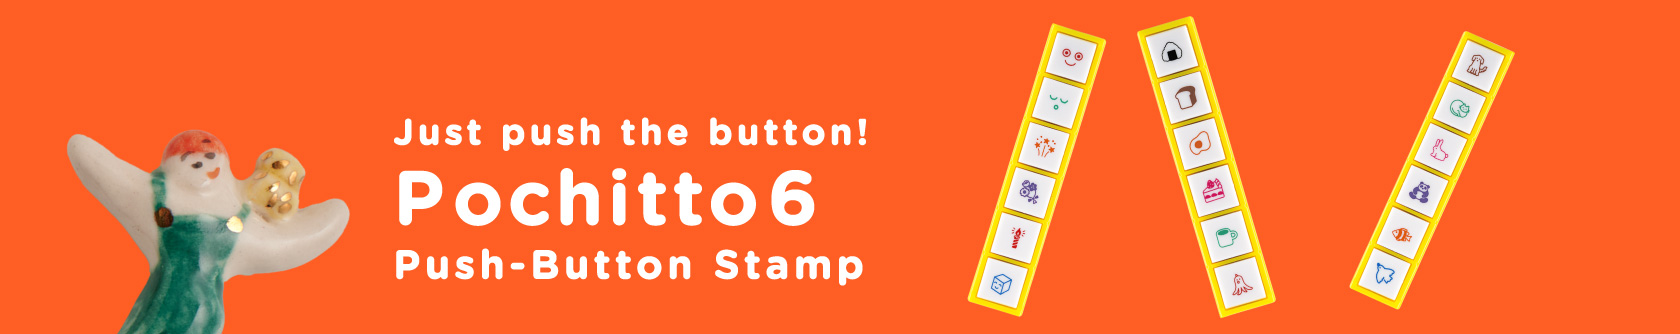 Just push the button!
                  Pochitto6 Push-Button Stamp